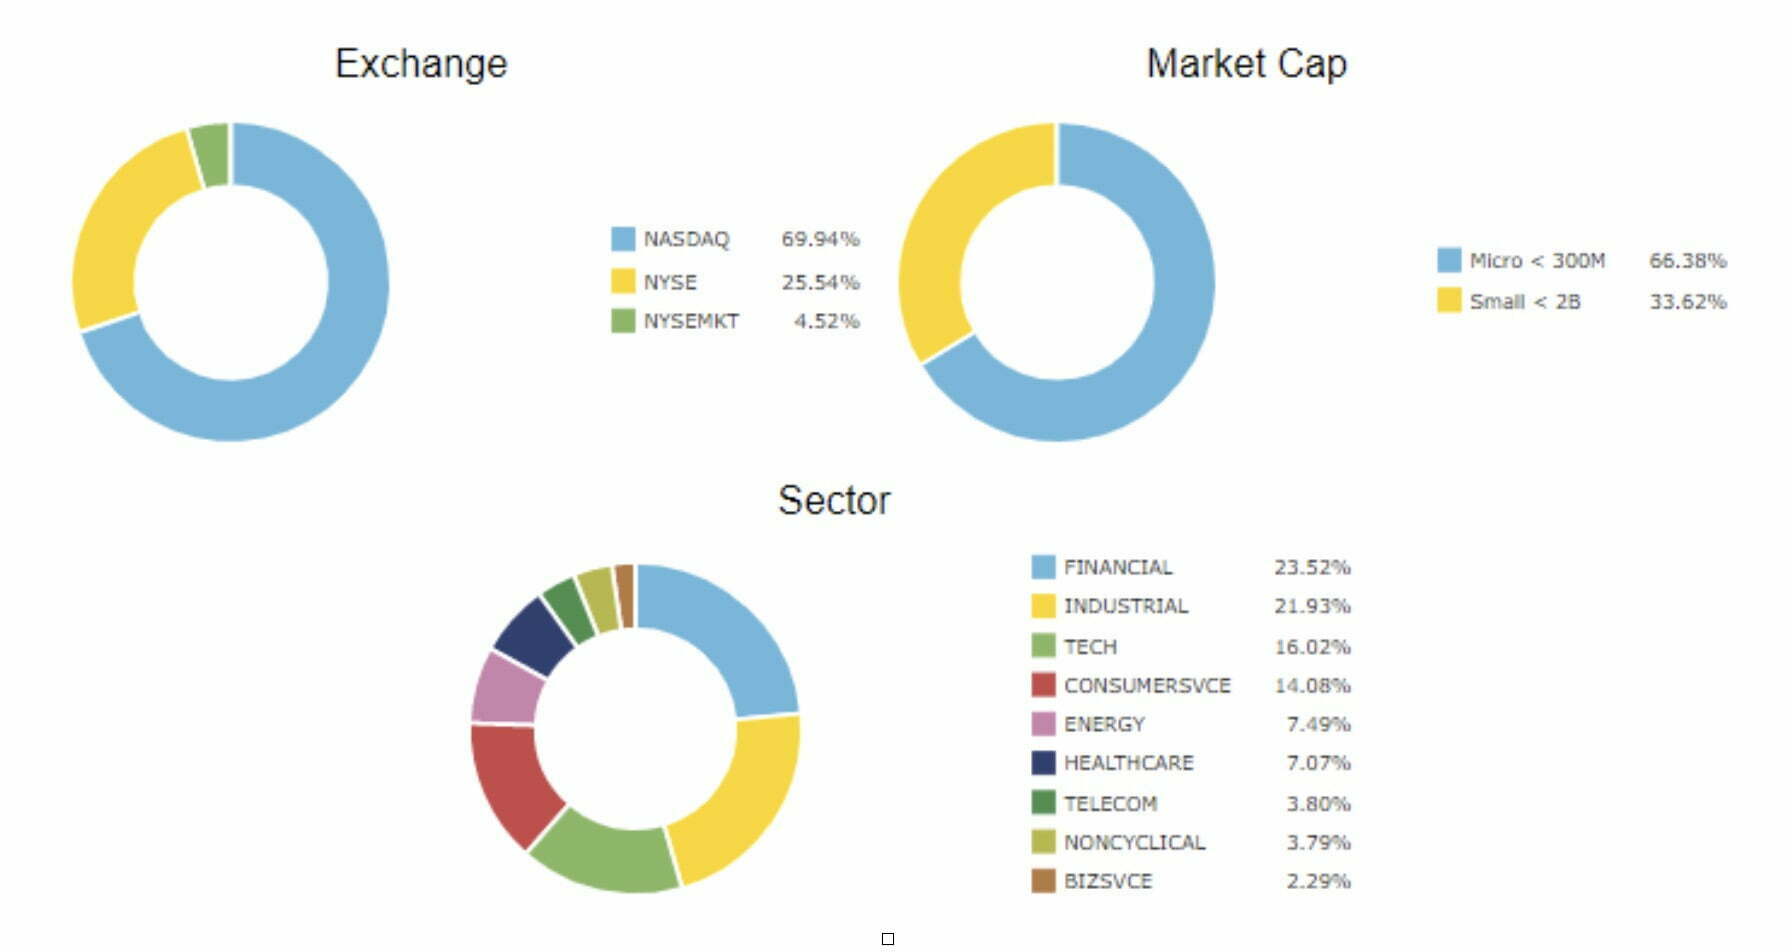 Micro-Cap and Small-Cap Holdings as sorted by Sector Weighting and listing on stock exchanges 